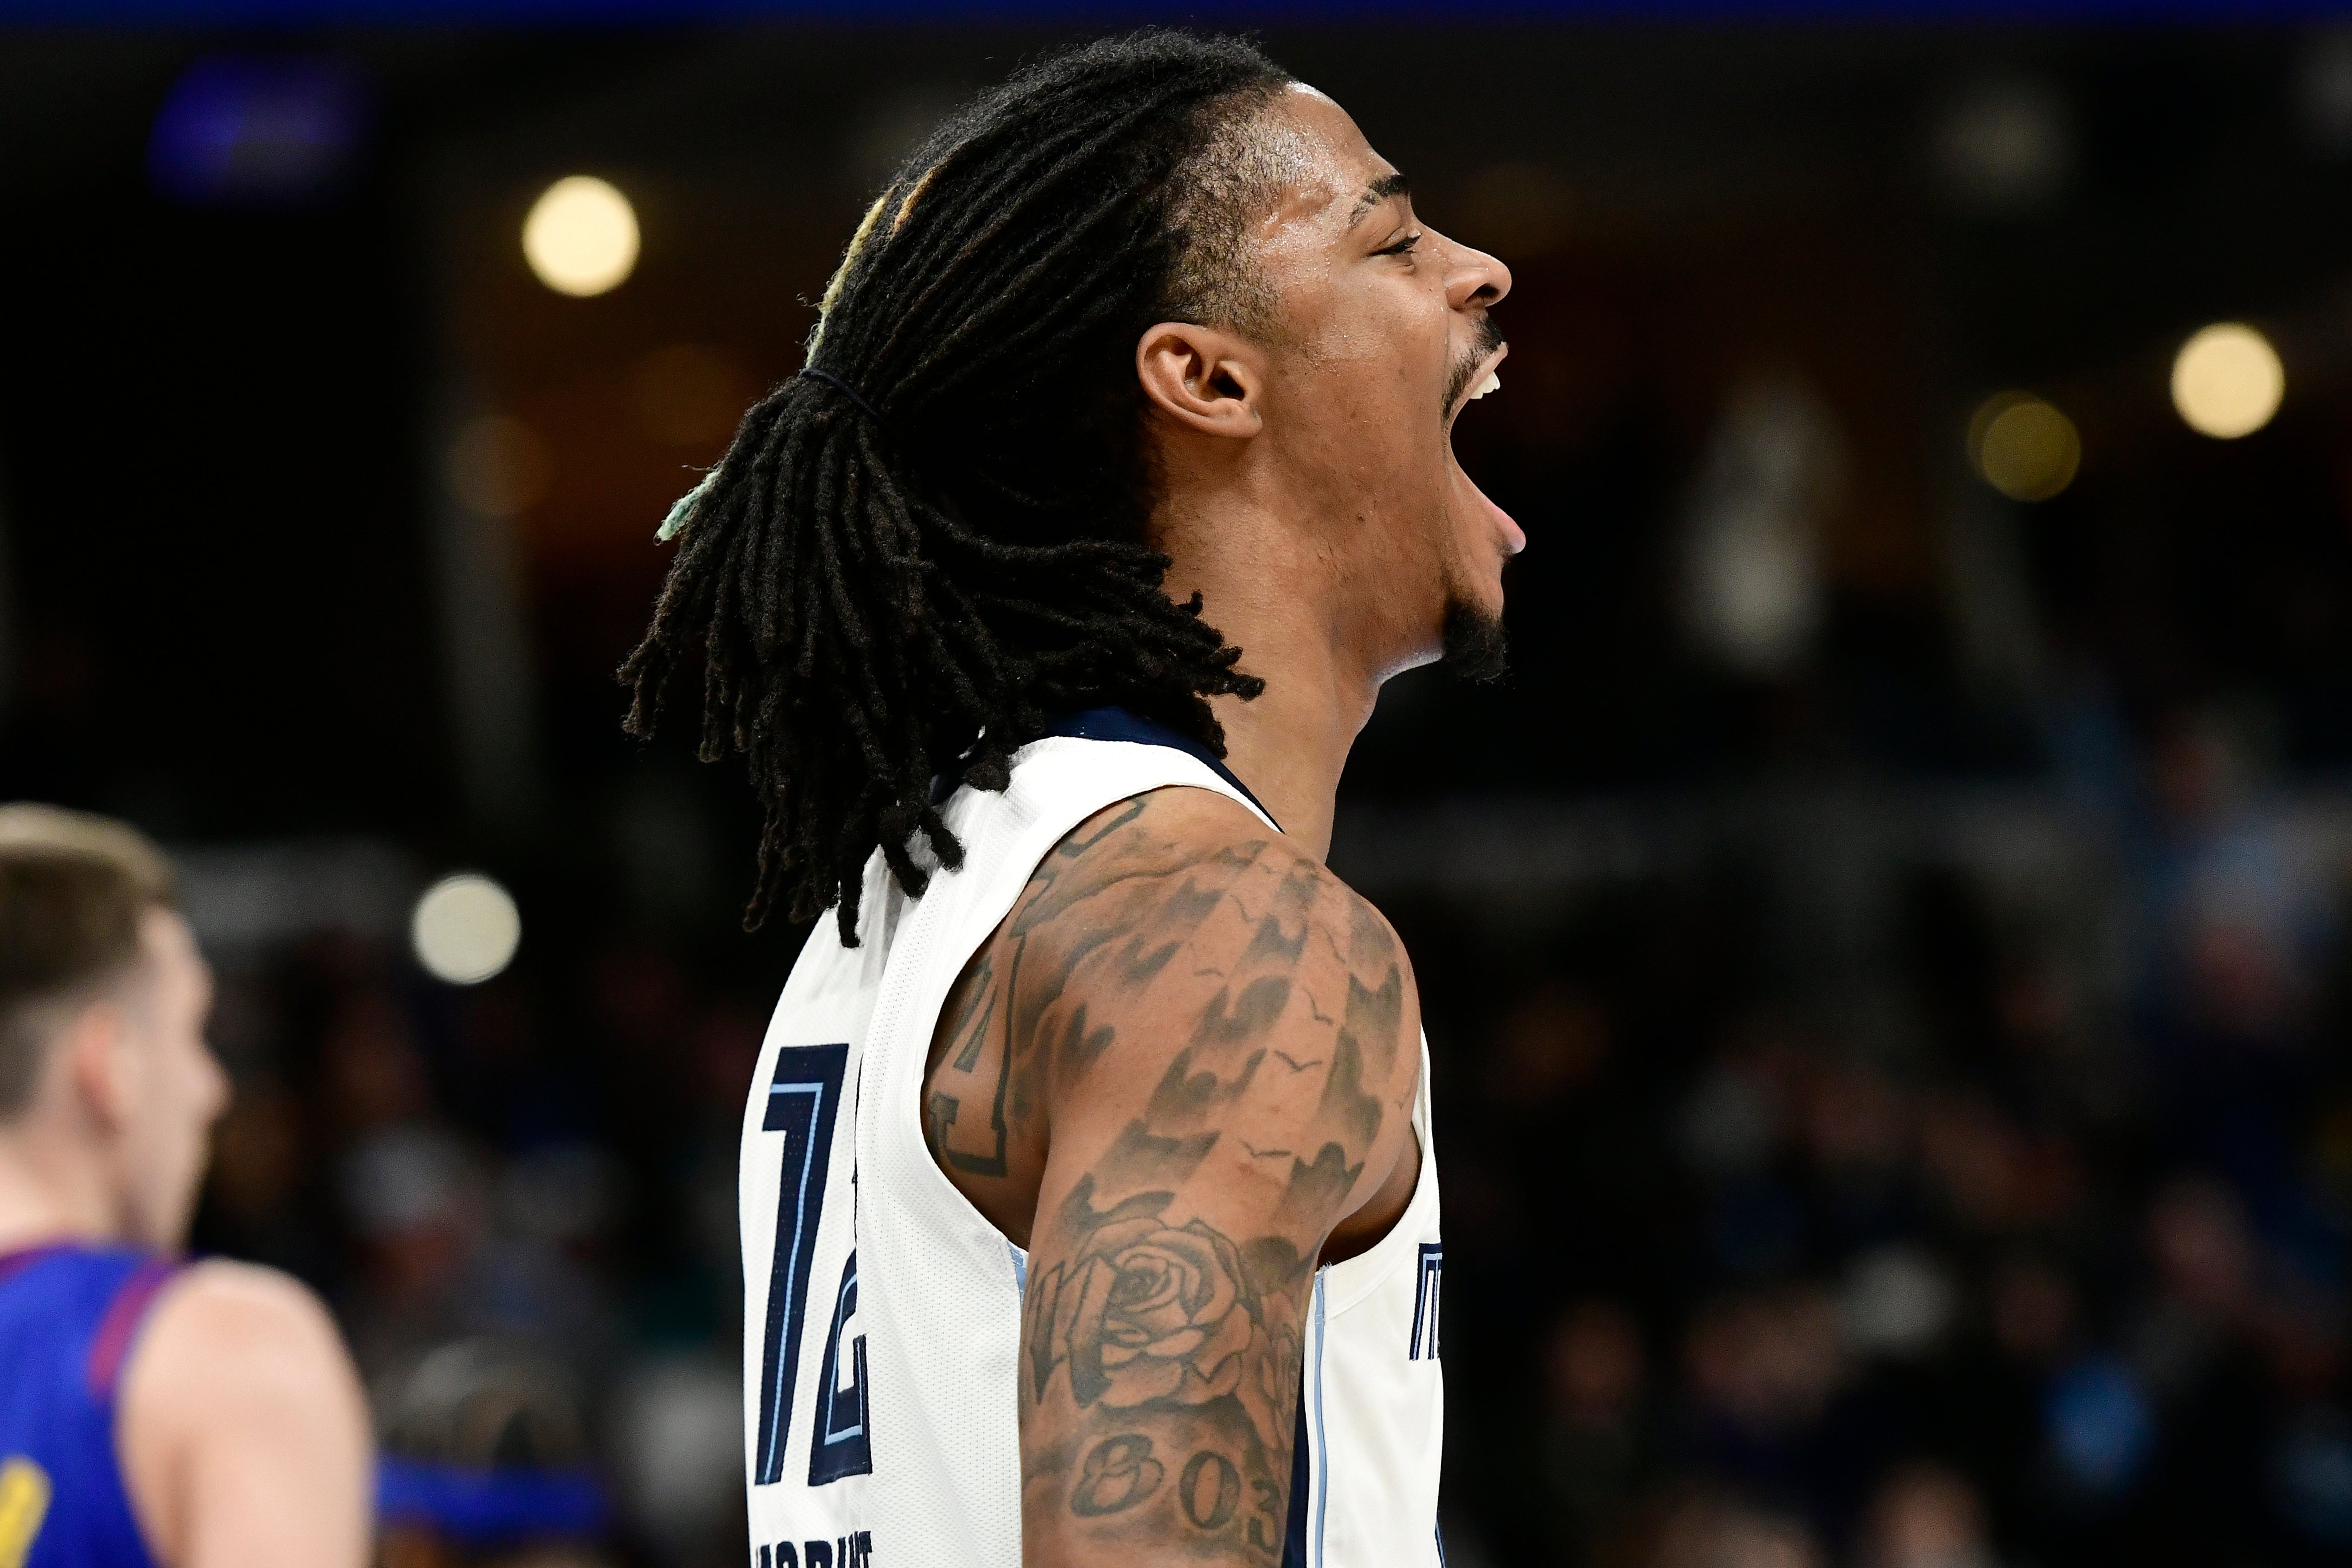 Memphis Grizzlies superstar Ja Morant was involved in two incidents that attracted police attention last summer, according to reports